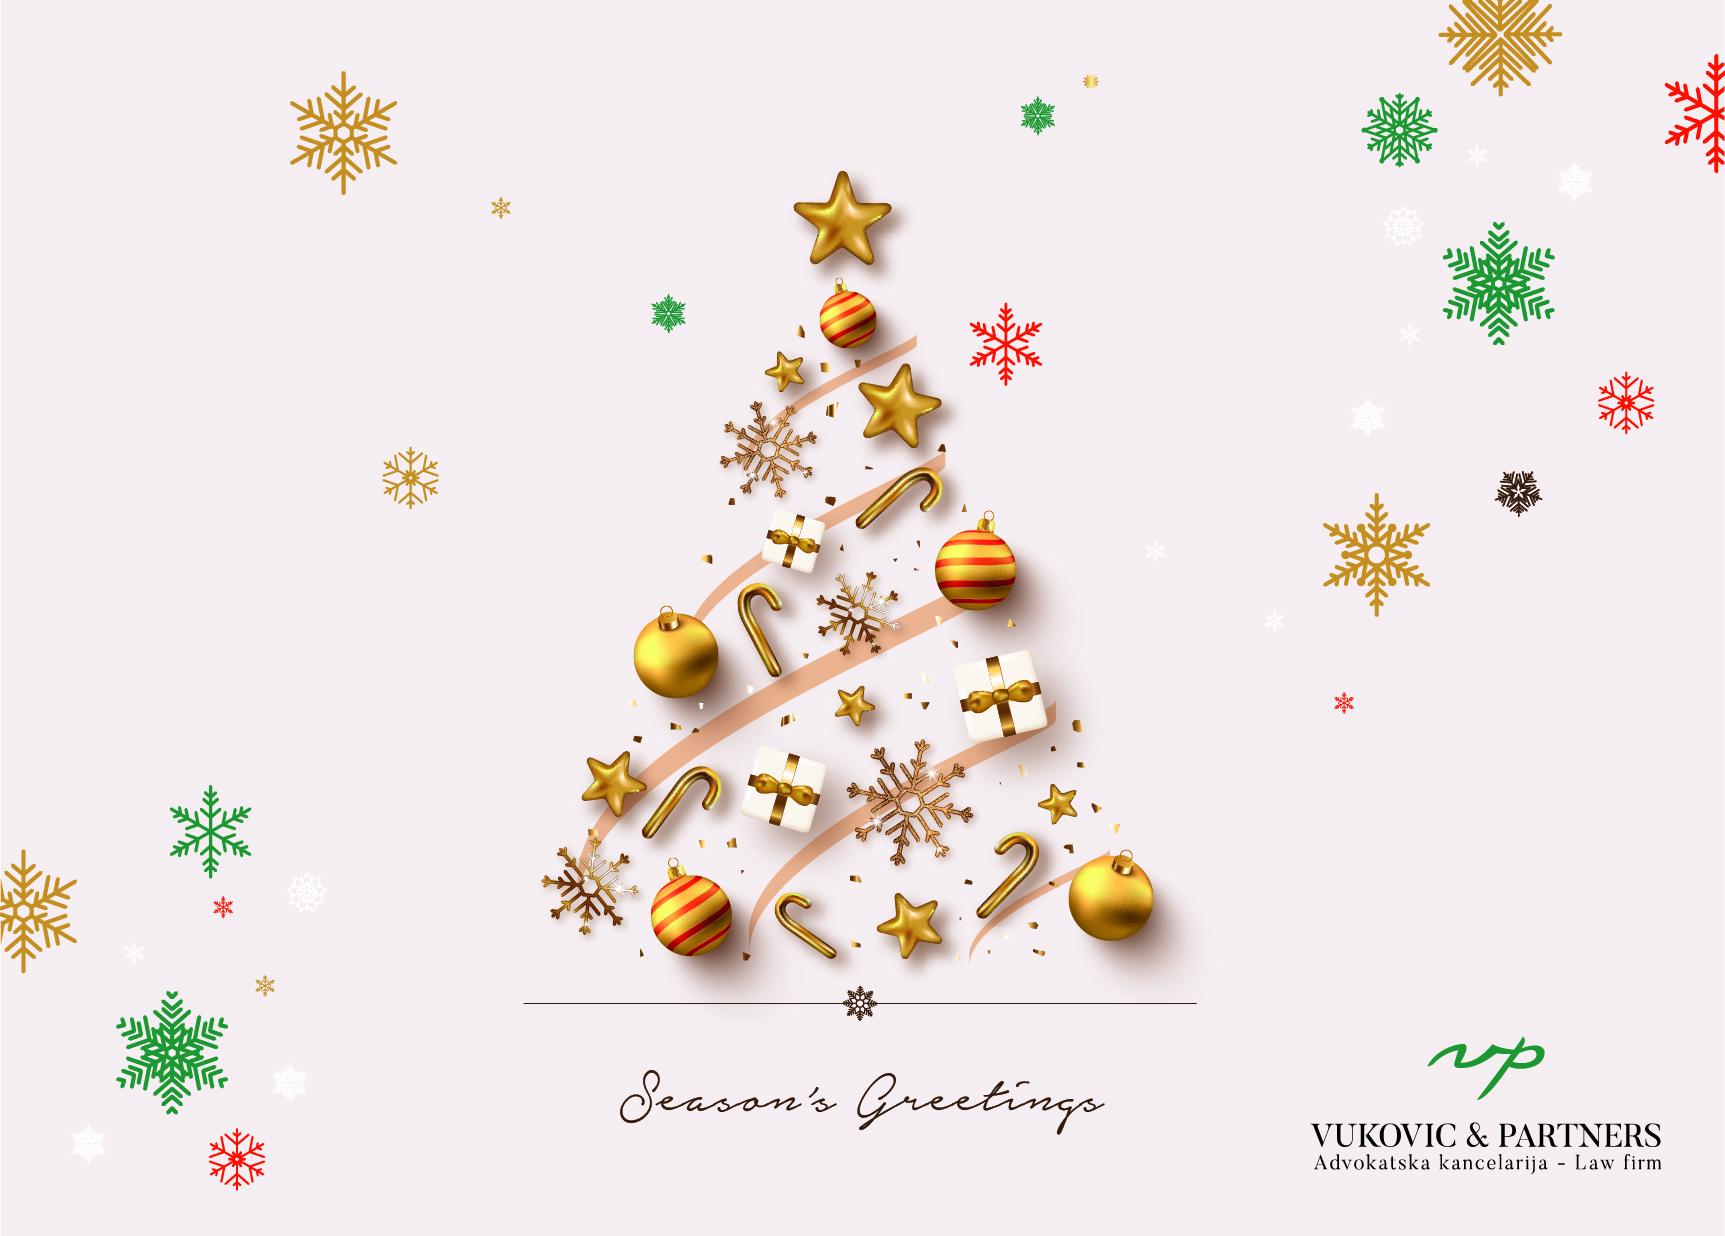 We wish you warmest Season's Greetings and a...